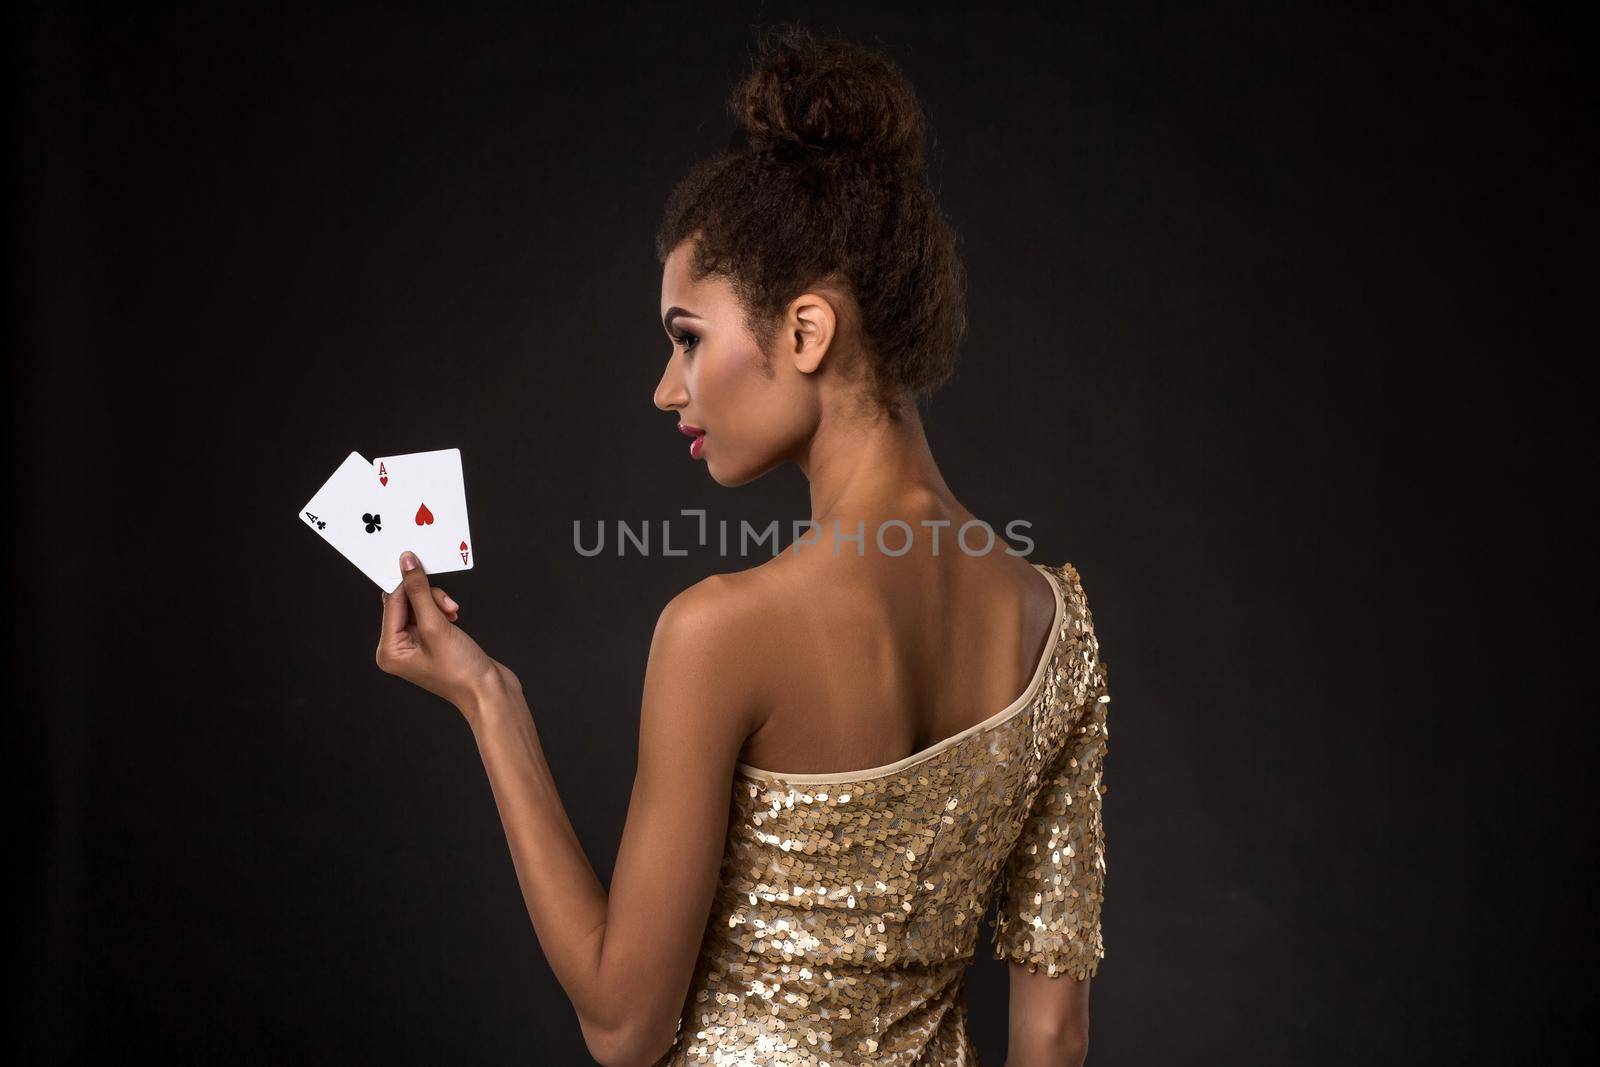 Woman winning - Young woman in a classy gold dress holding two aces, a poker of aces card combination. Studio shot on black background. A young woman stands with her back